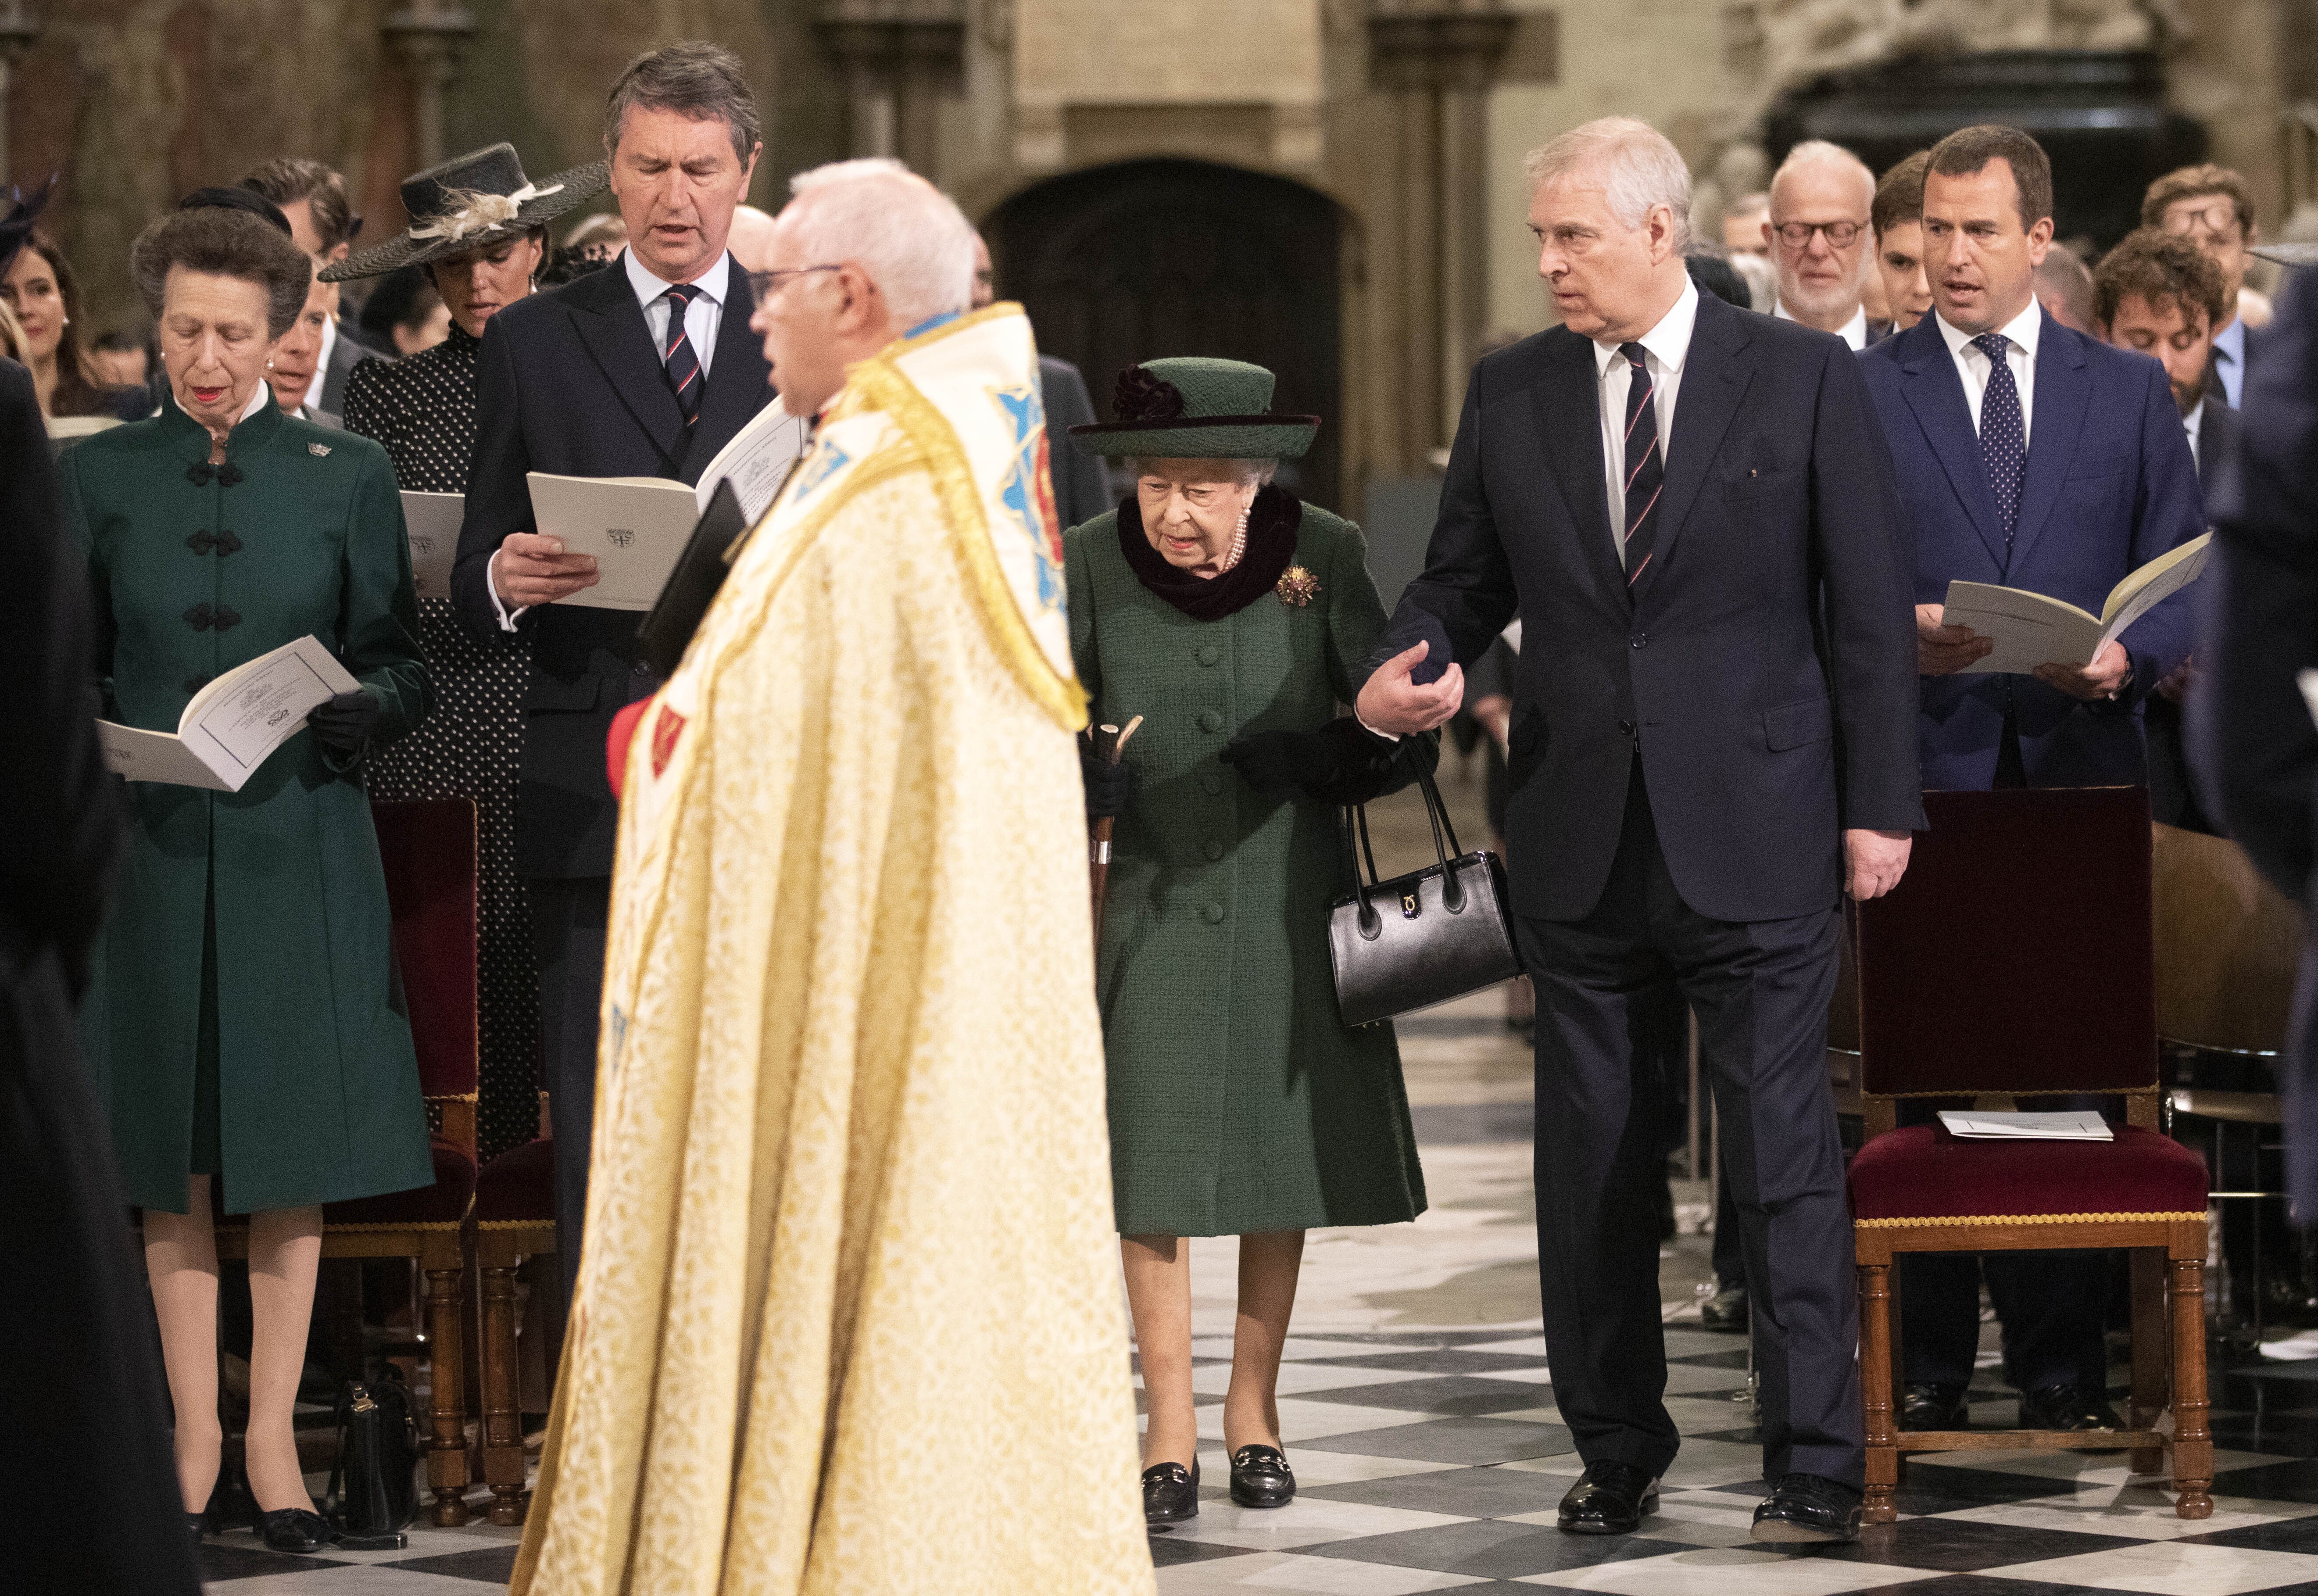 The Queen relies on the Duke of York’s support as she moves through the Abbey (Richard Pohle/The Times/PA)